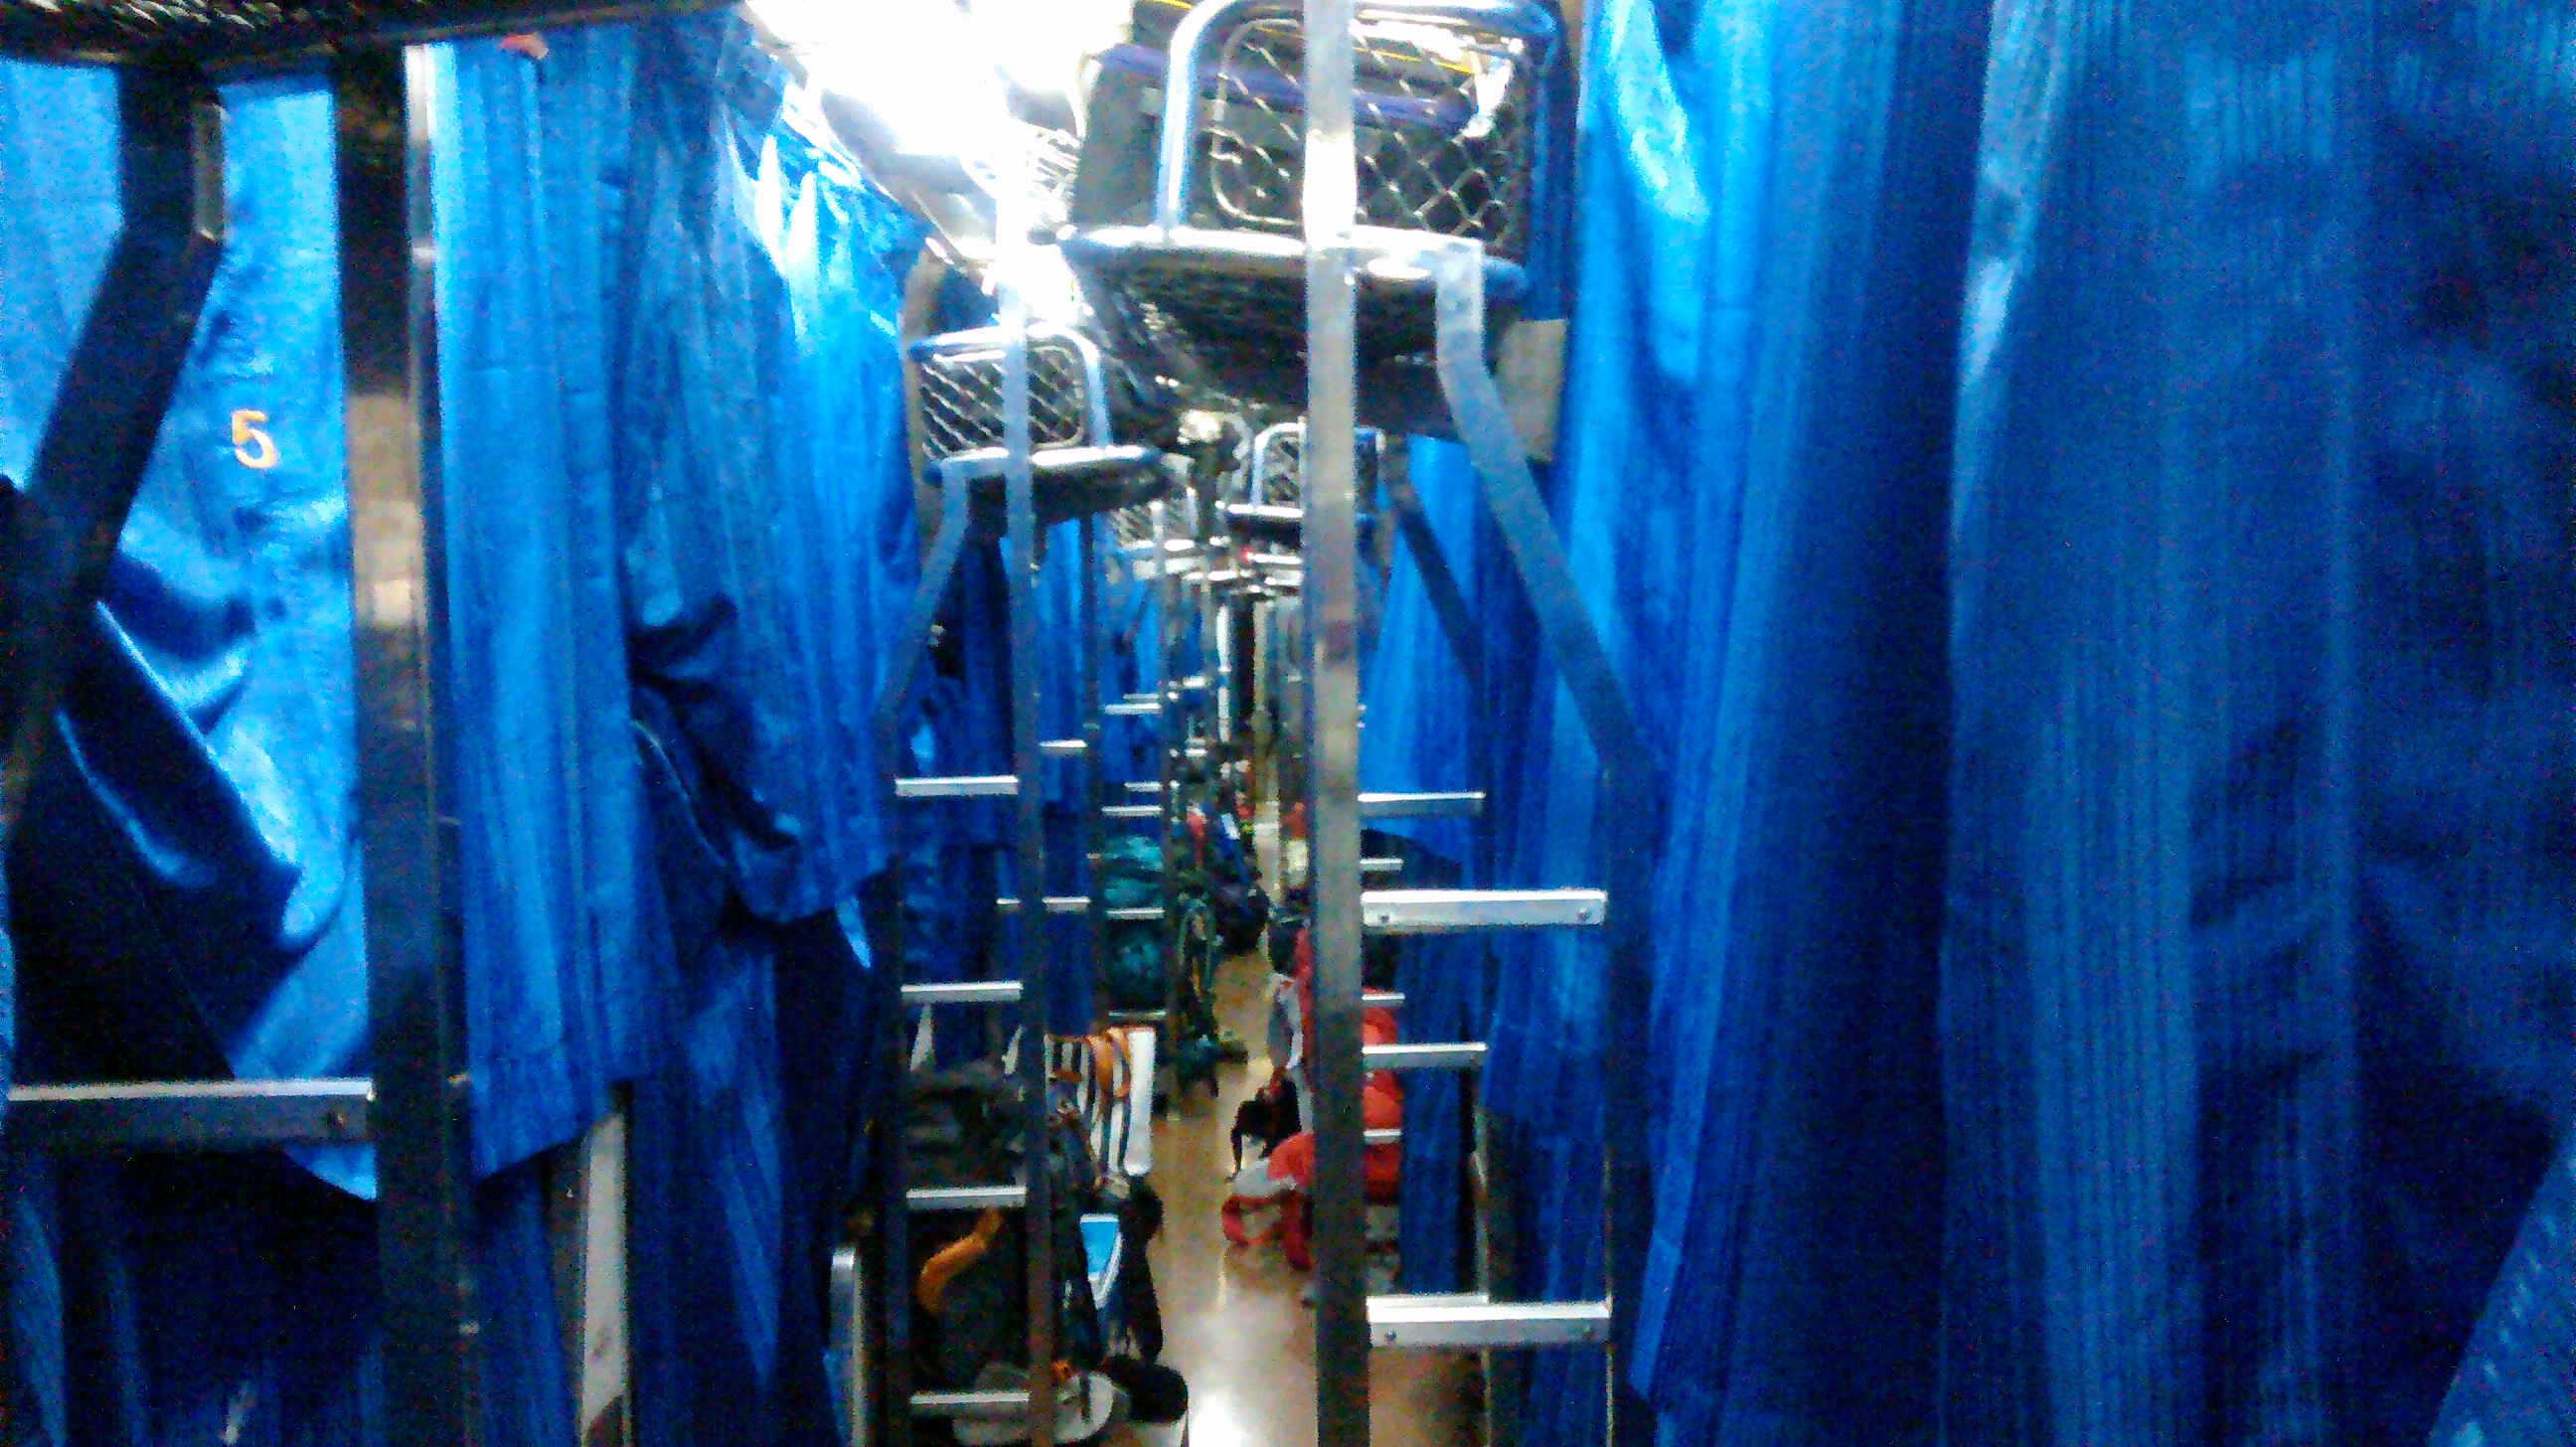 The bunks on the sleeper train. The train is set up very cleverly. There are two seats facing into each other in each section which fold down to one bed and then another bed folds down from the top for the bunk.